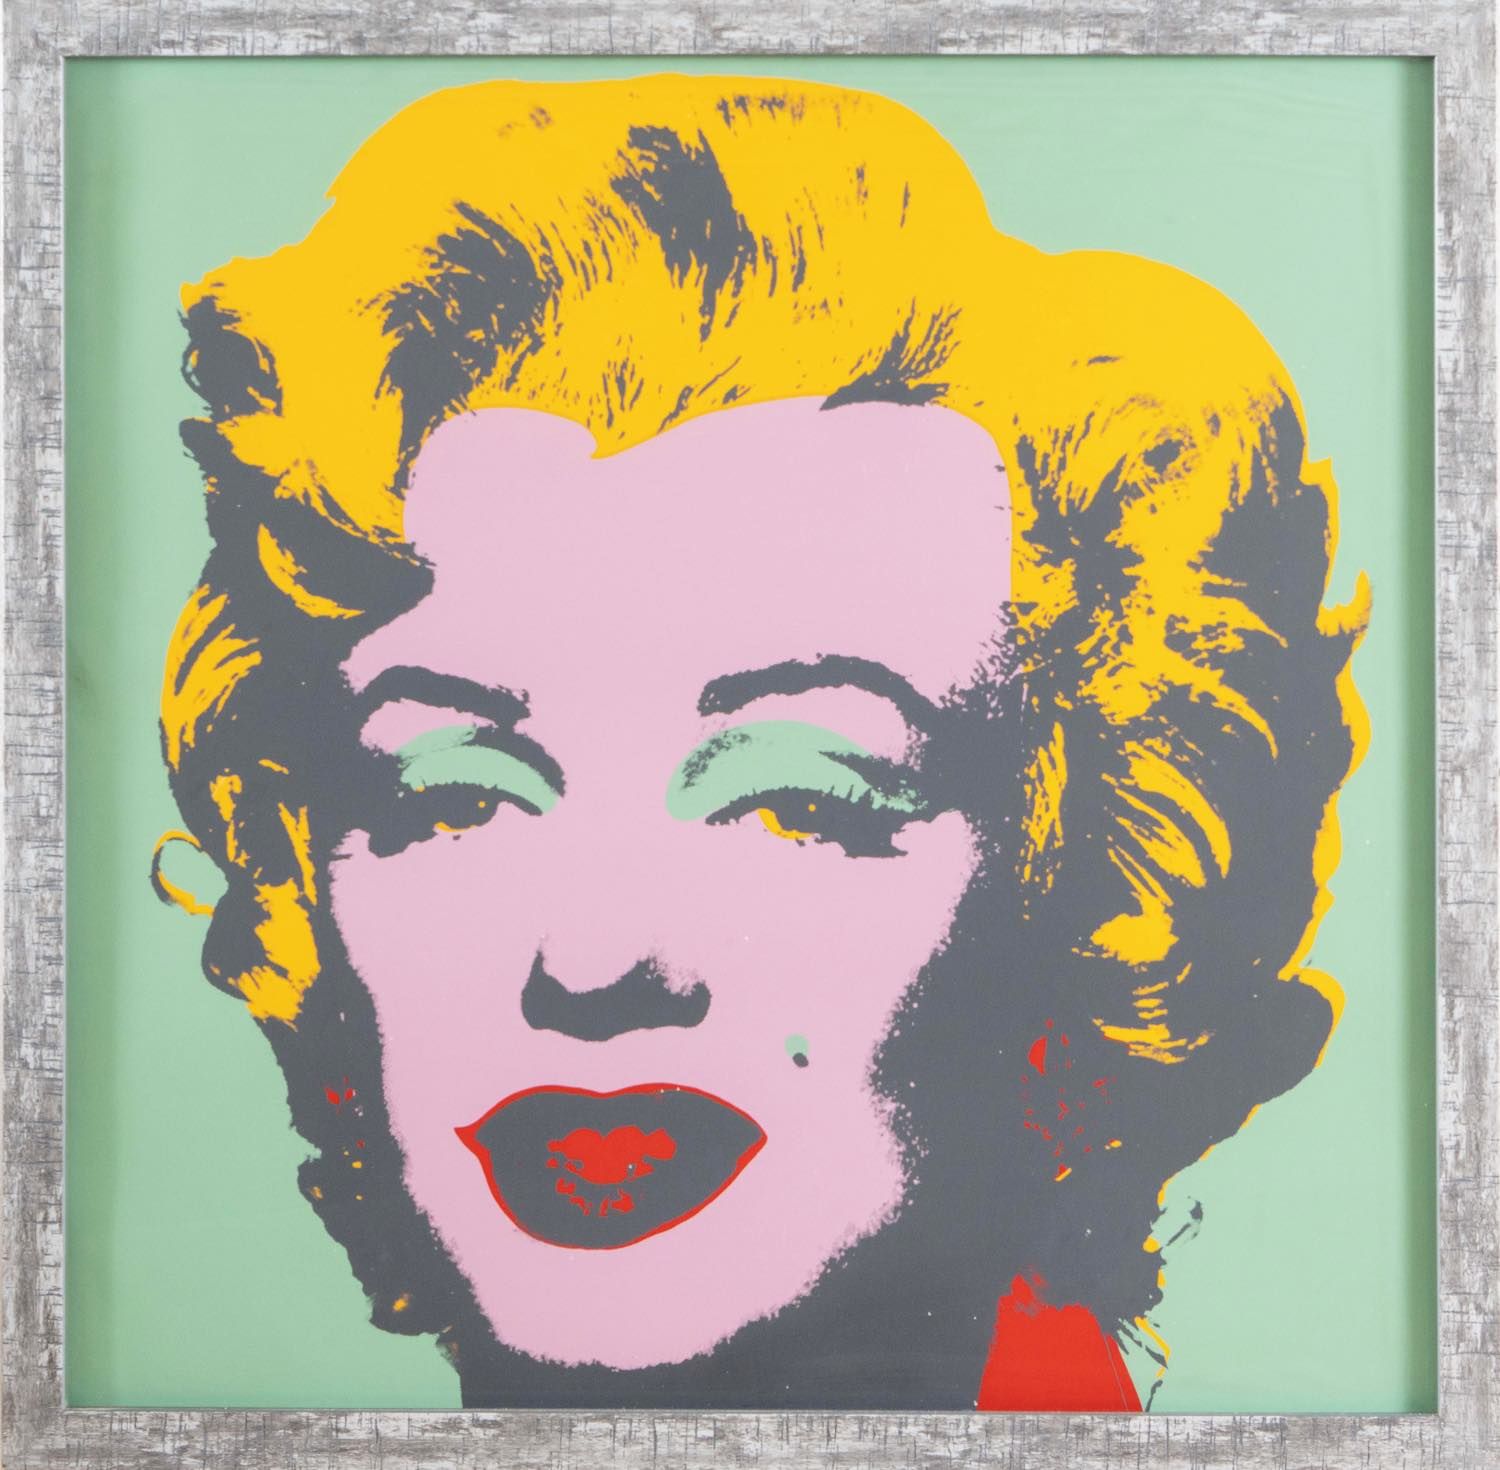 Andy Warhol (Pittsburgh 1928 - New York 1987), “Marilyn Monroe 
Sérigraphie coul&hellip;